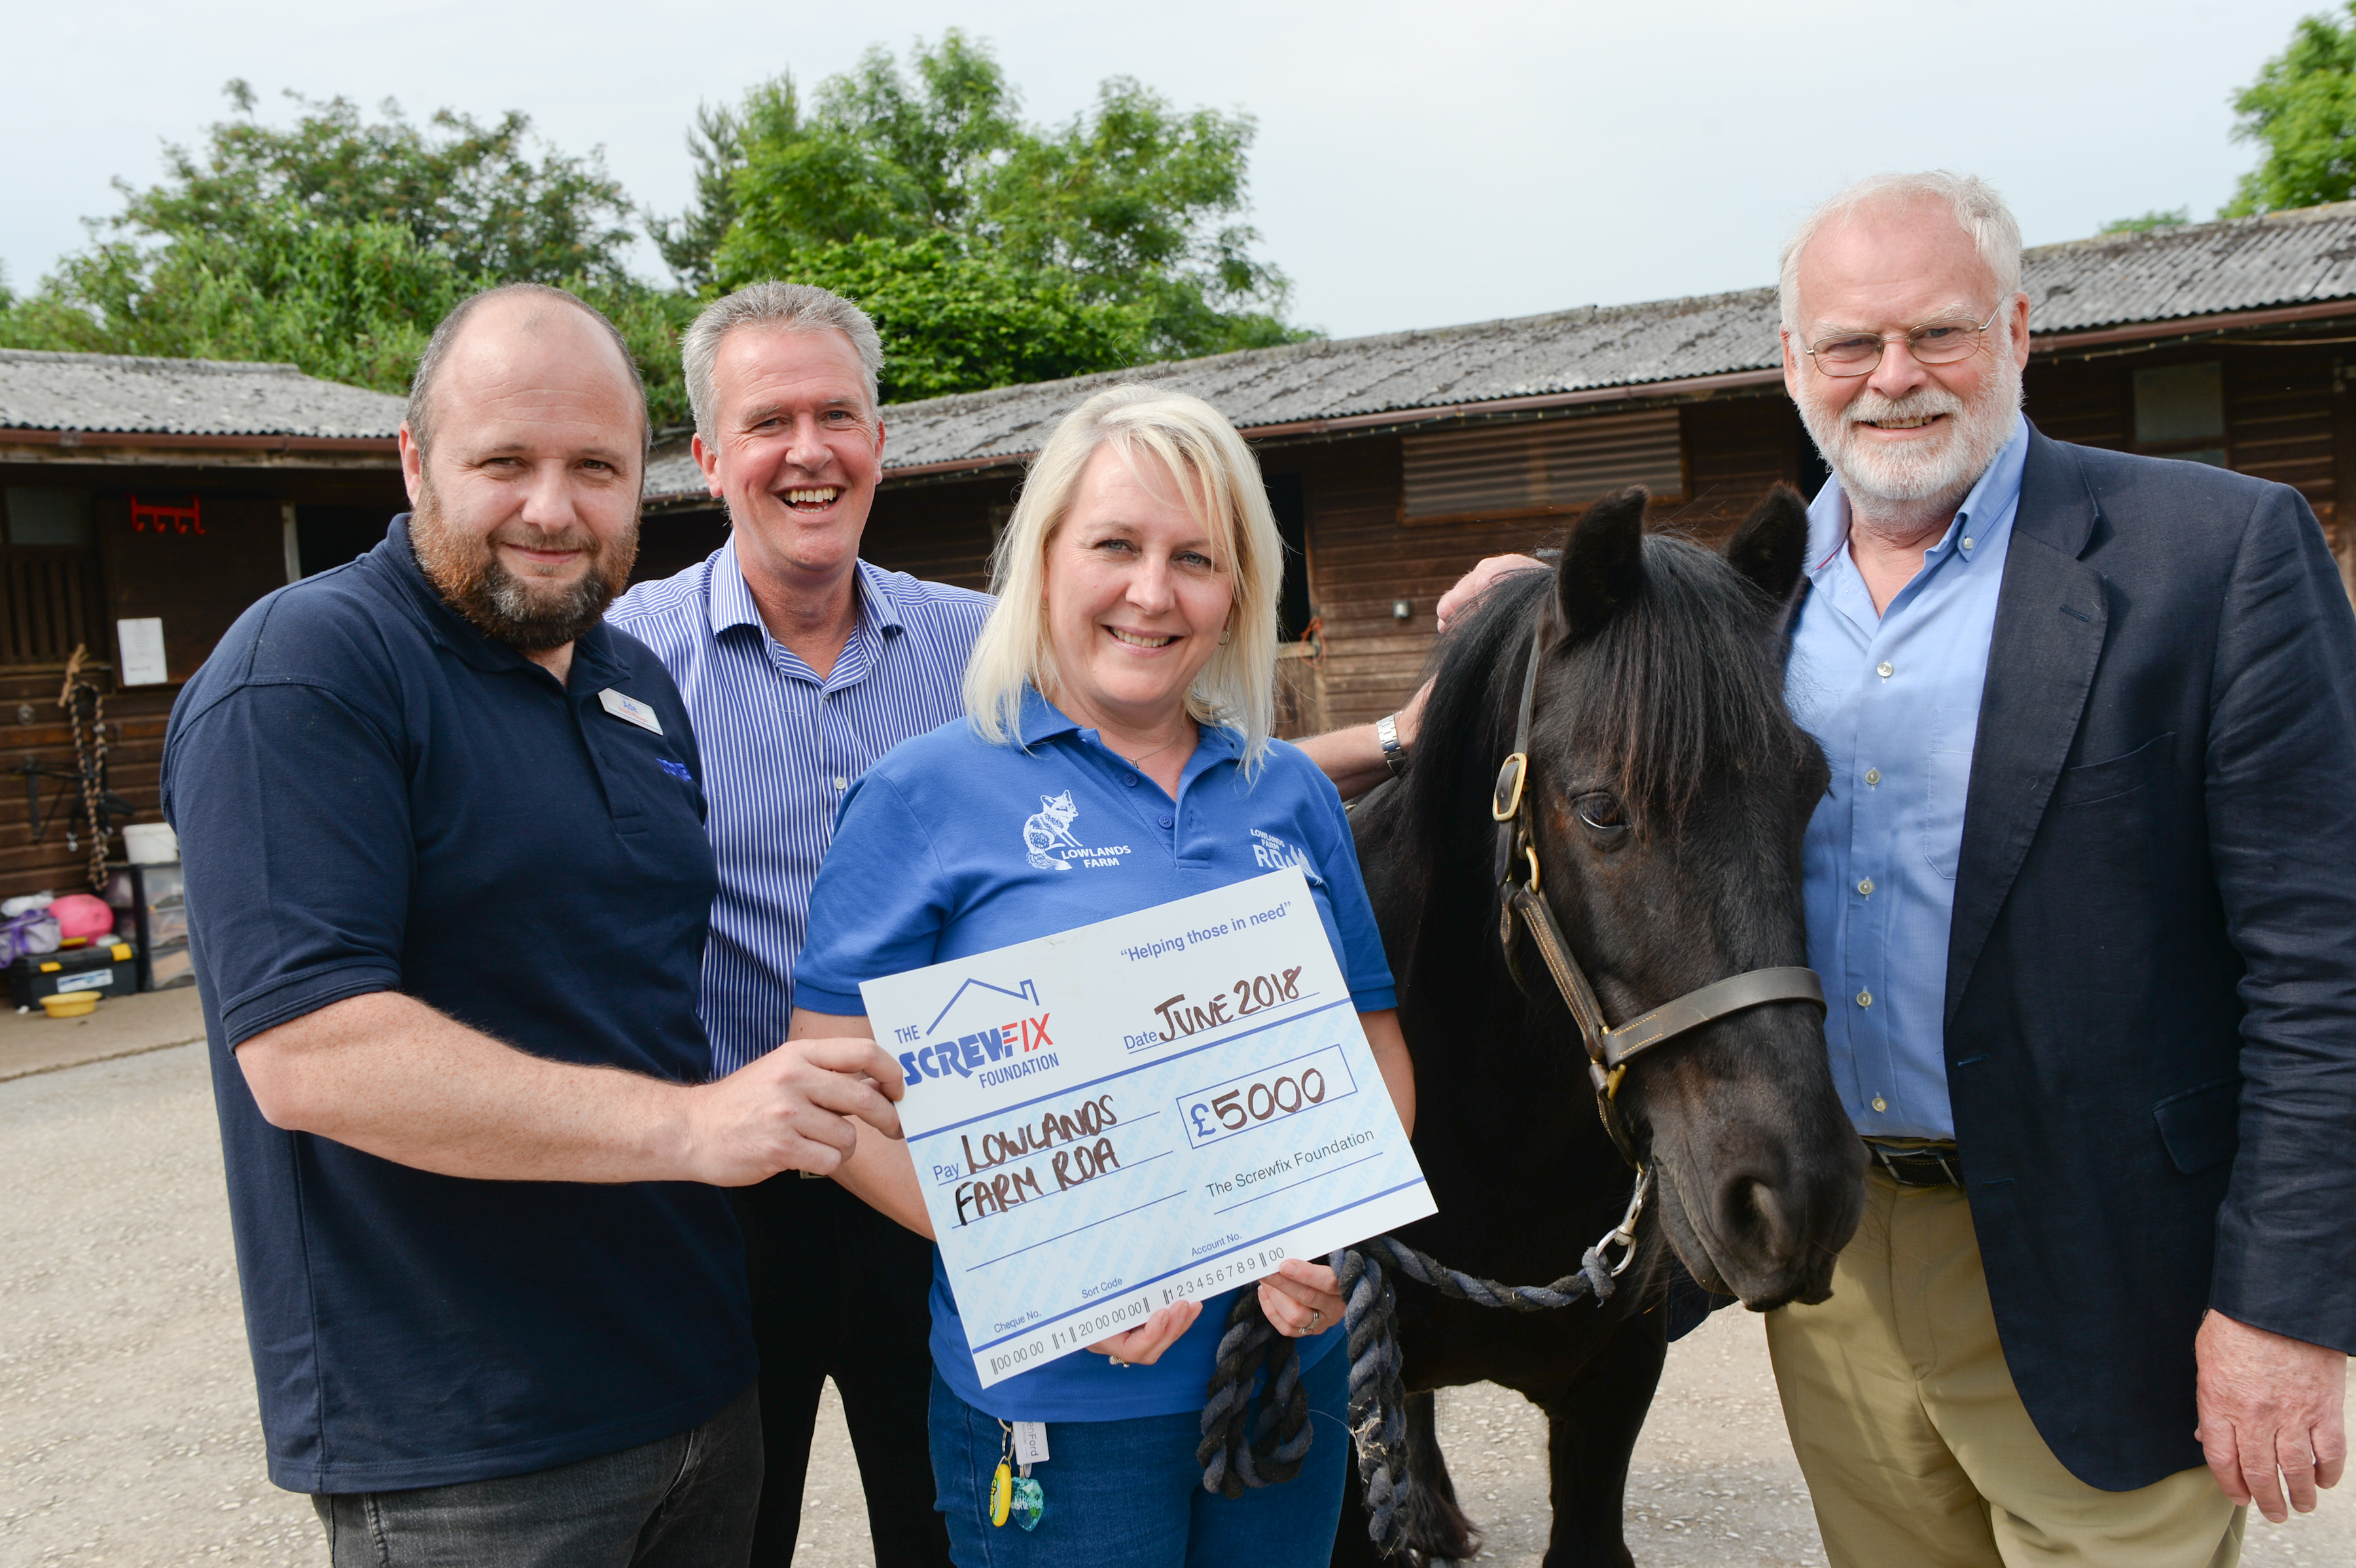 Lowlands Farm RDA gets a helping hand from the Screwfix Foundation